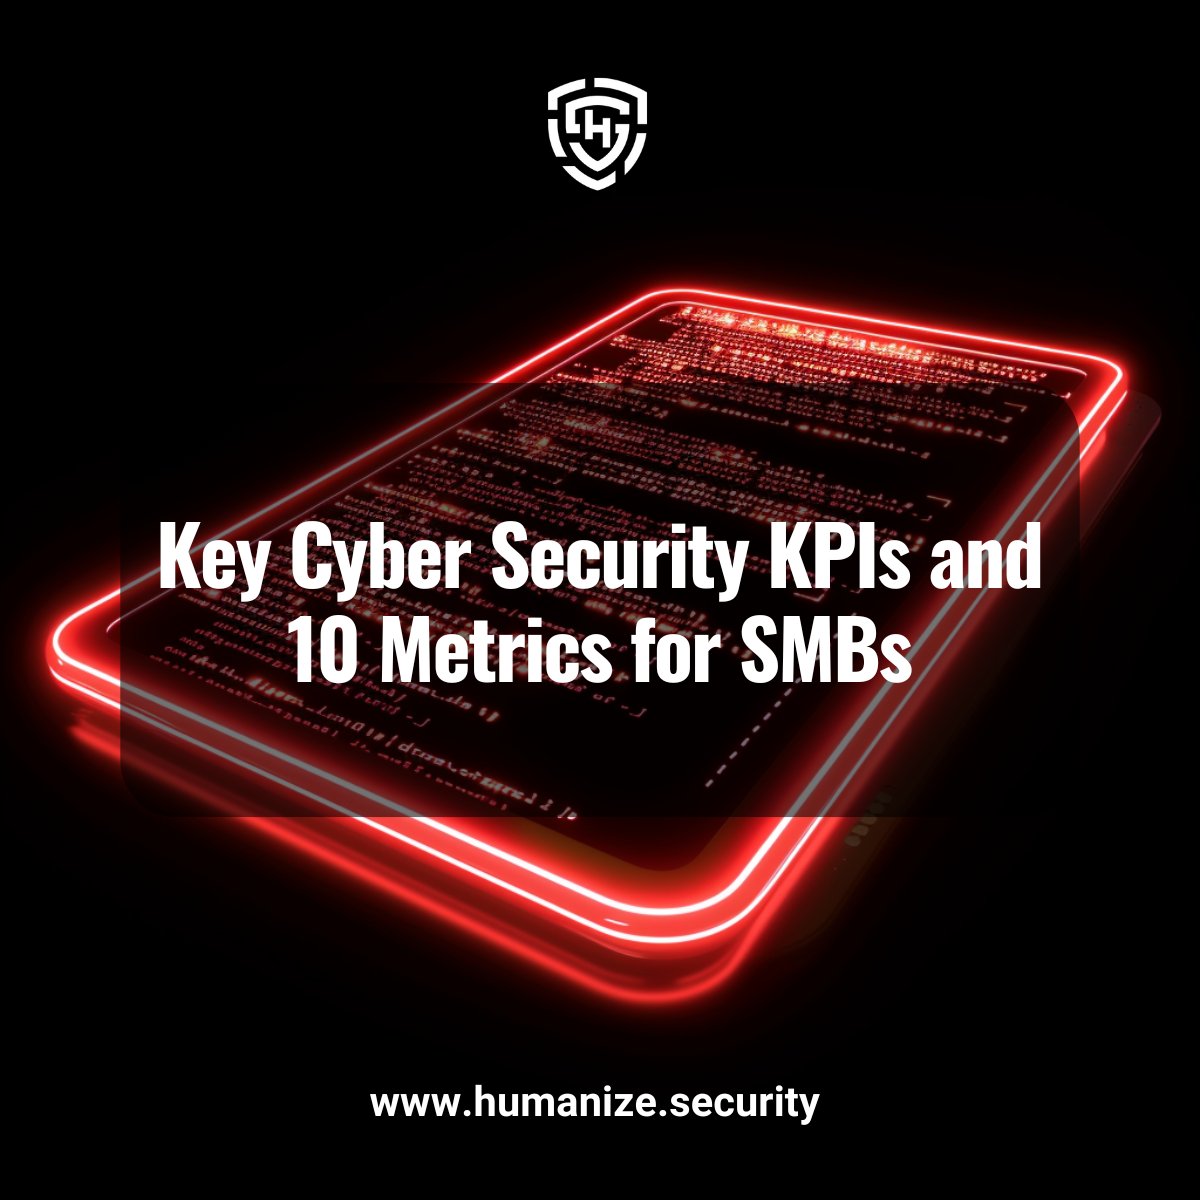 🚀 Attention SMBs! Boost your cybersecurity strategy with these essential KPIs and metrics! 

🛡 Don't miss out! 

Read more here: humanize.security/blog/cyber-str…

#CyberSecurity #KPIs #Metrics #CyberStrategy #Salience